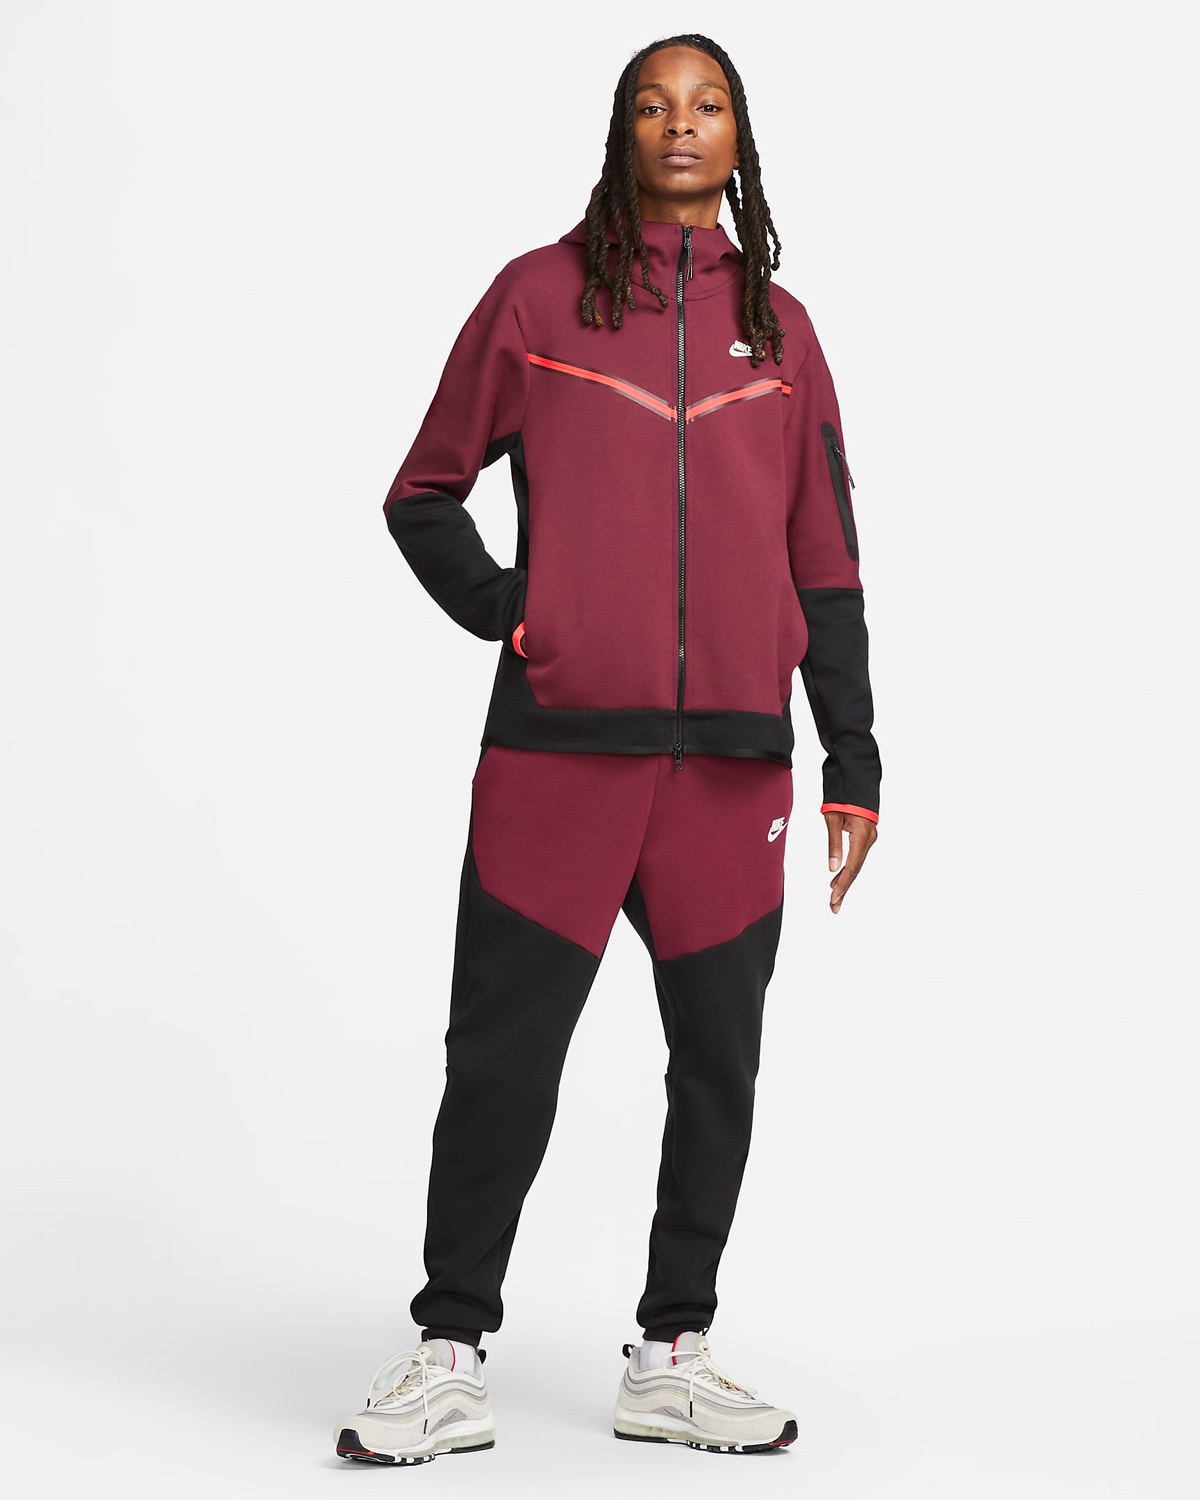 Nike Dark Beetroot Shirts Clothing and Sneaker Outfits